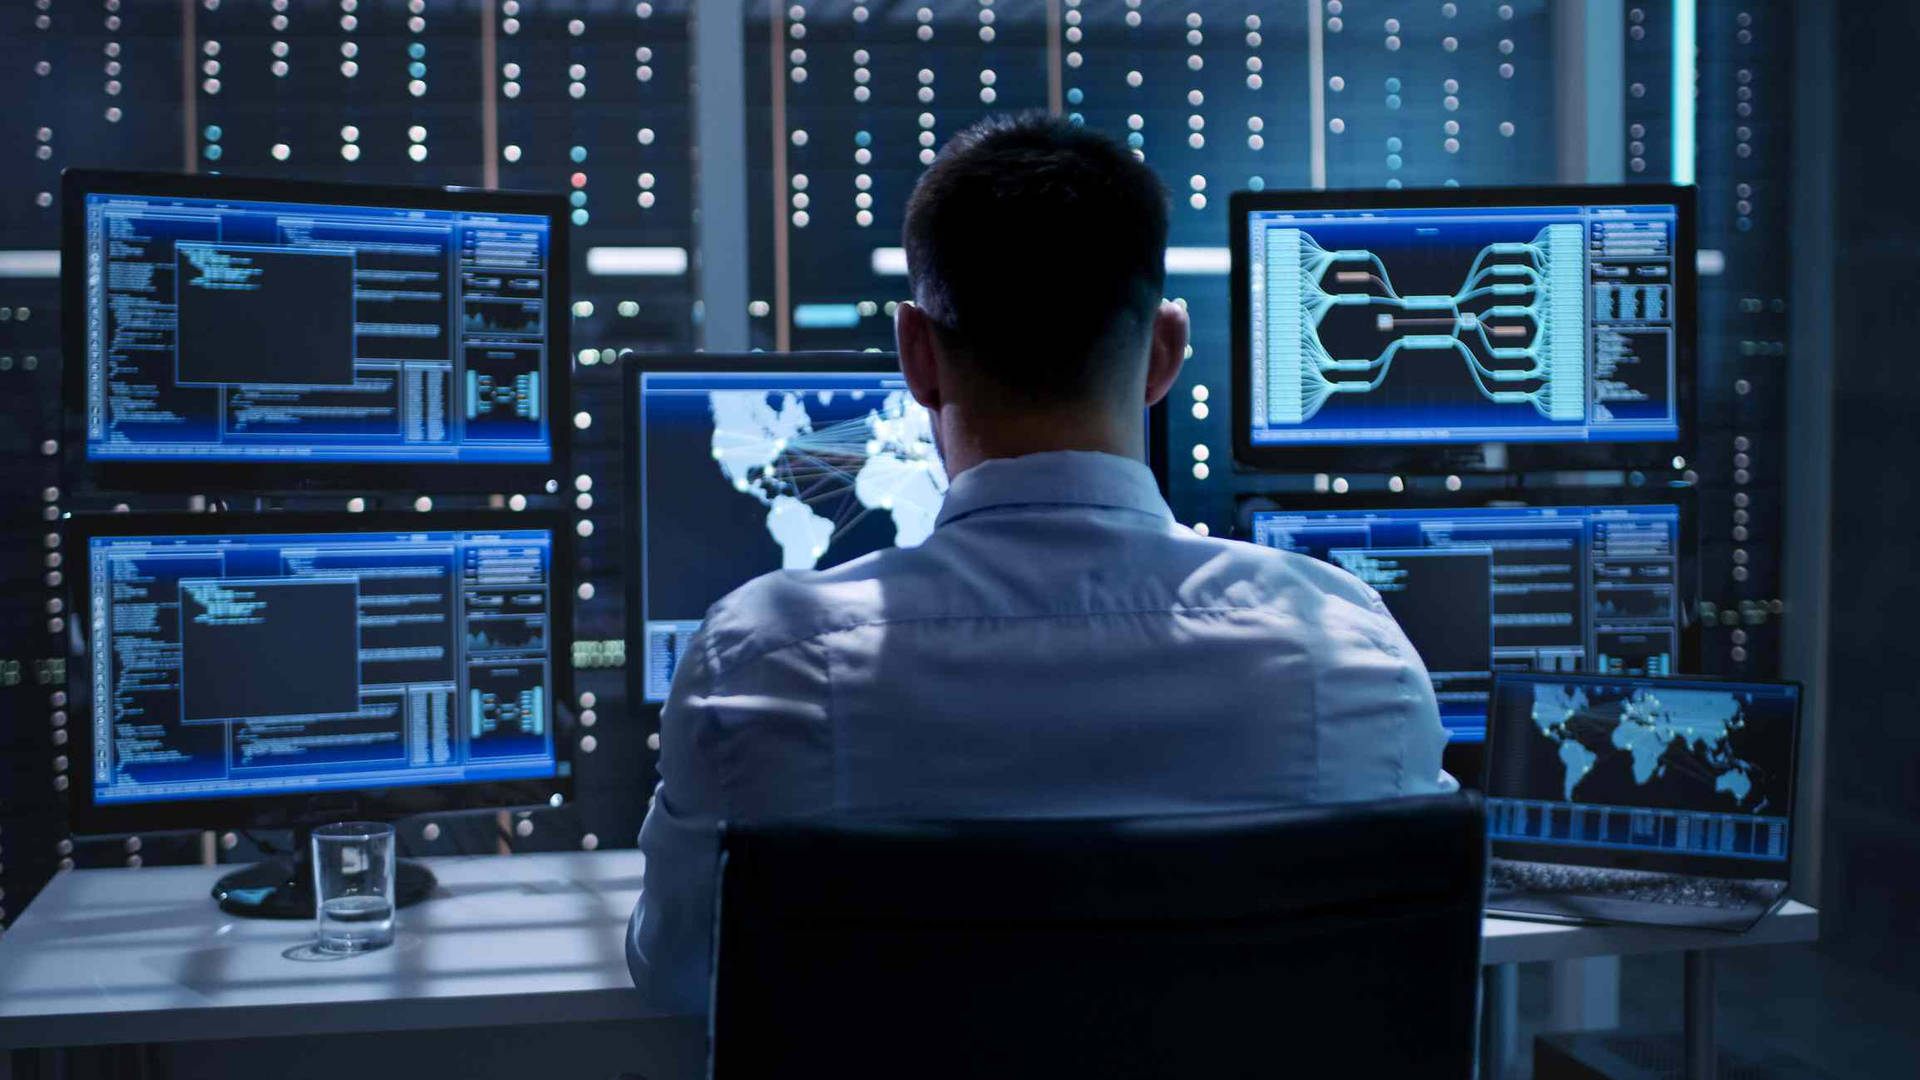 Engineer Working With Computers Wallpaper